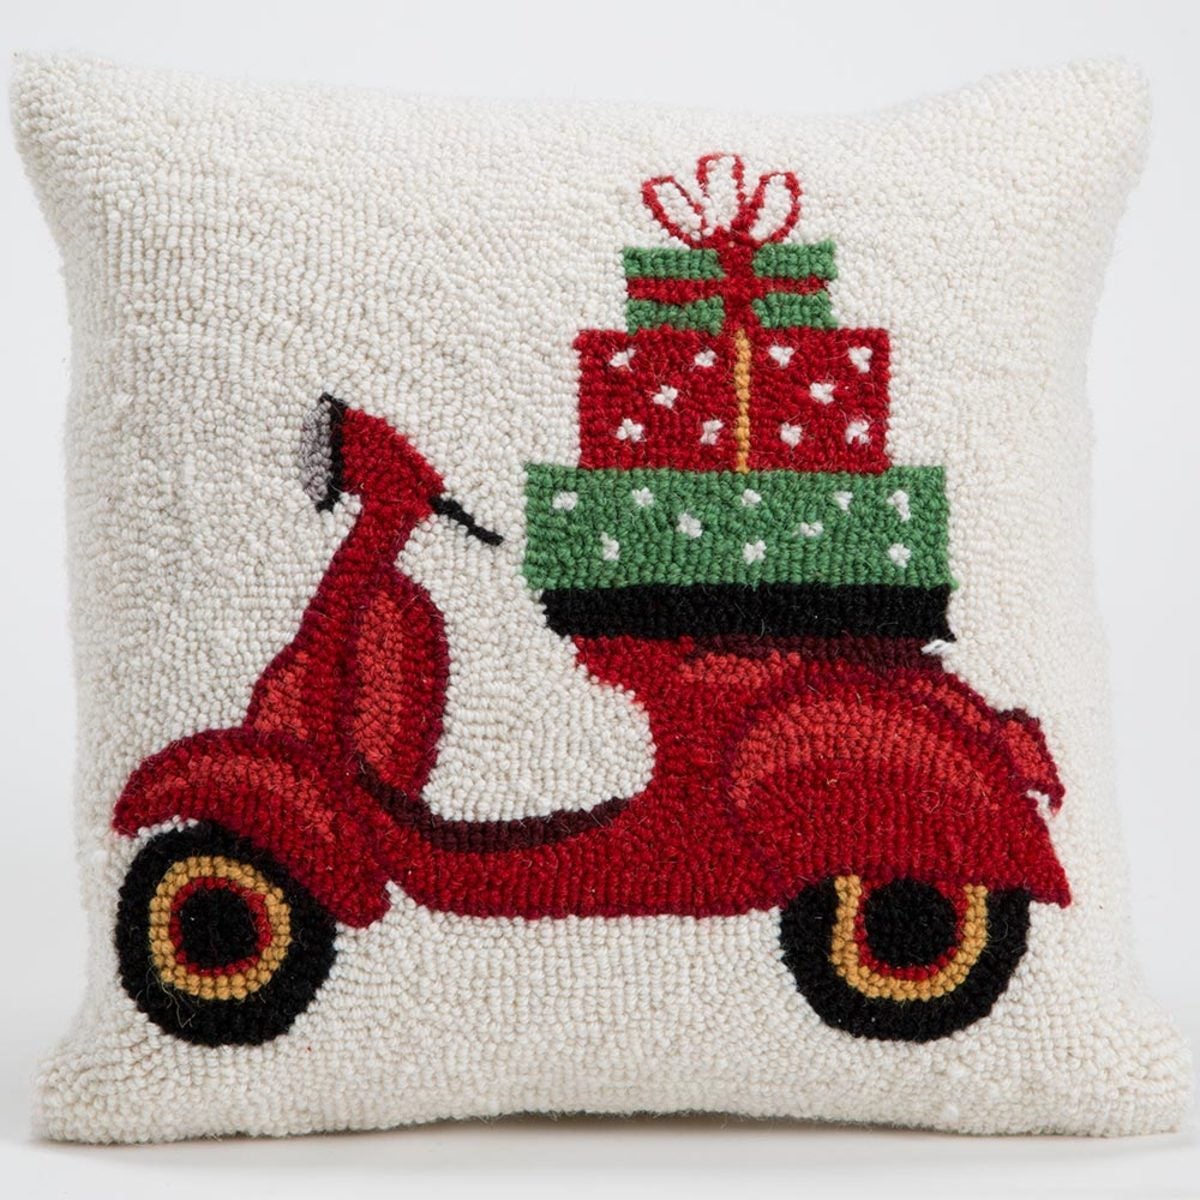 Hand-Hooked Wool Pillow, 16" sq.